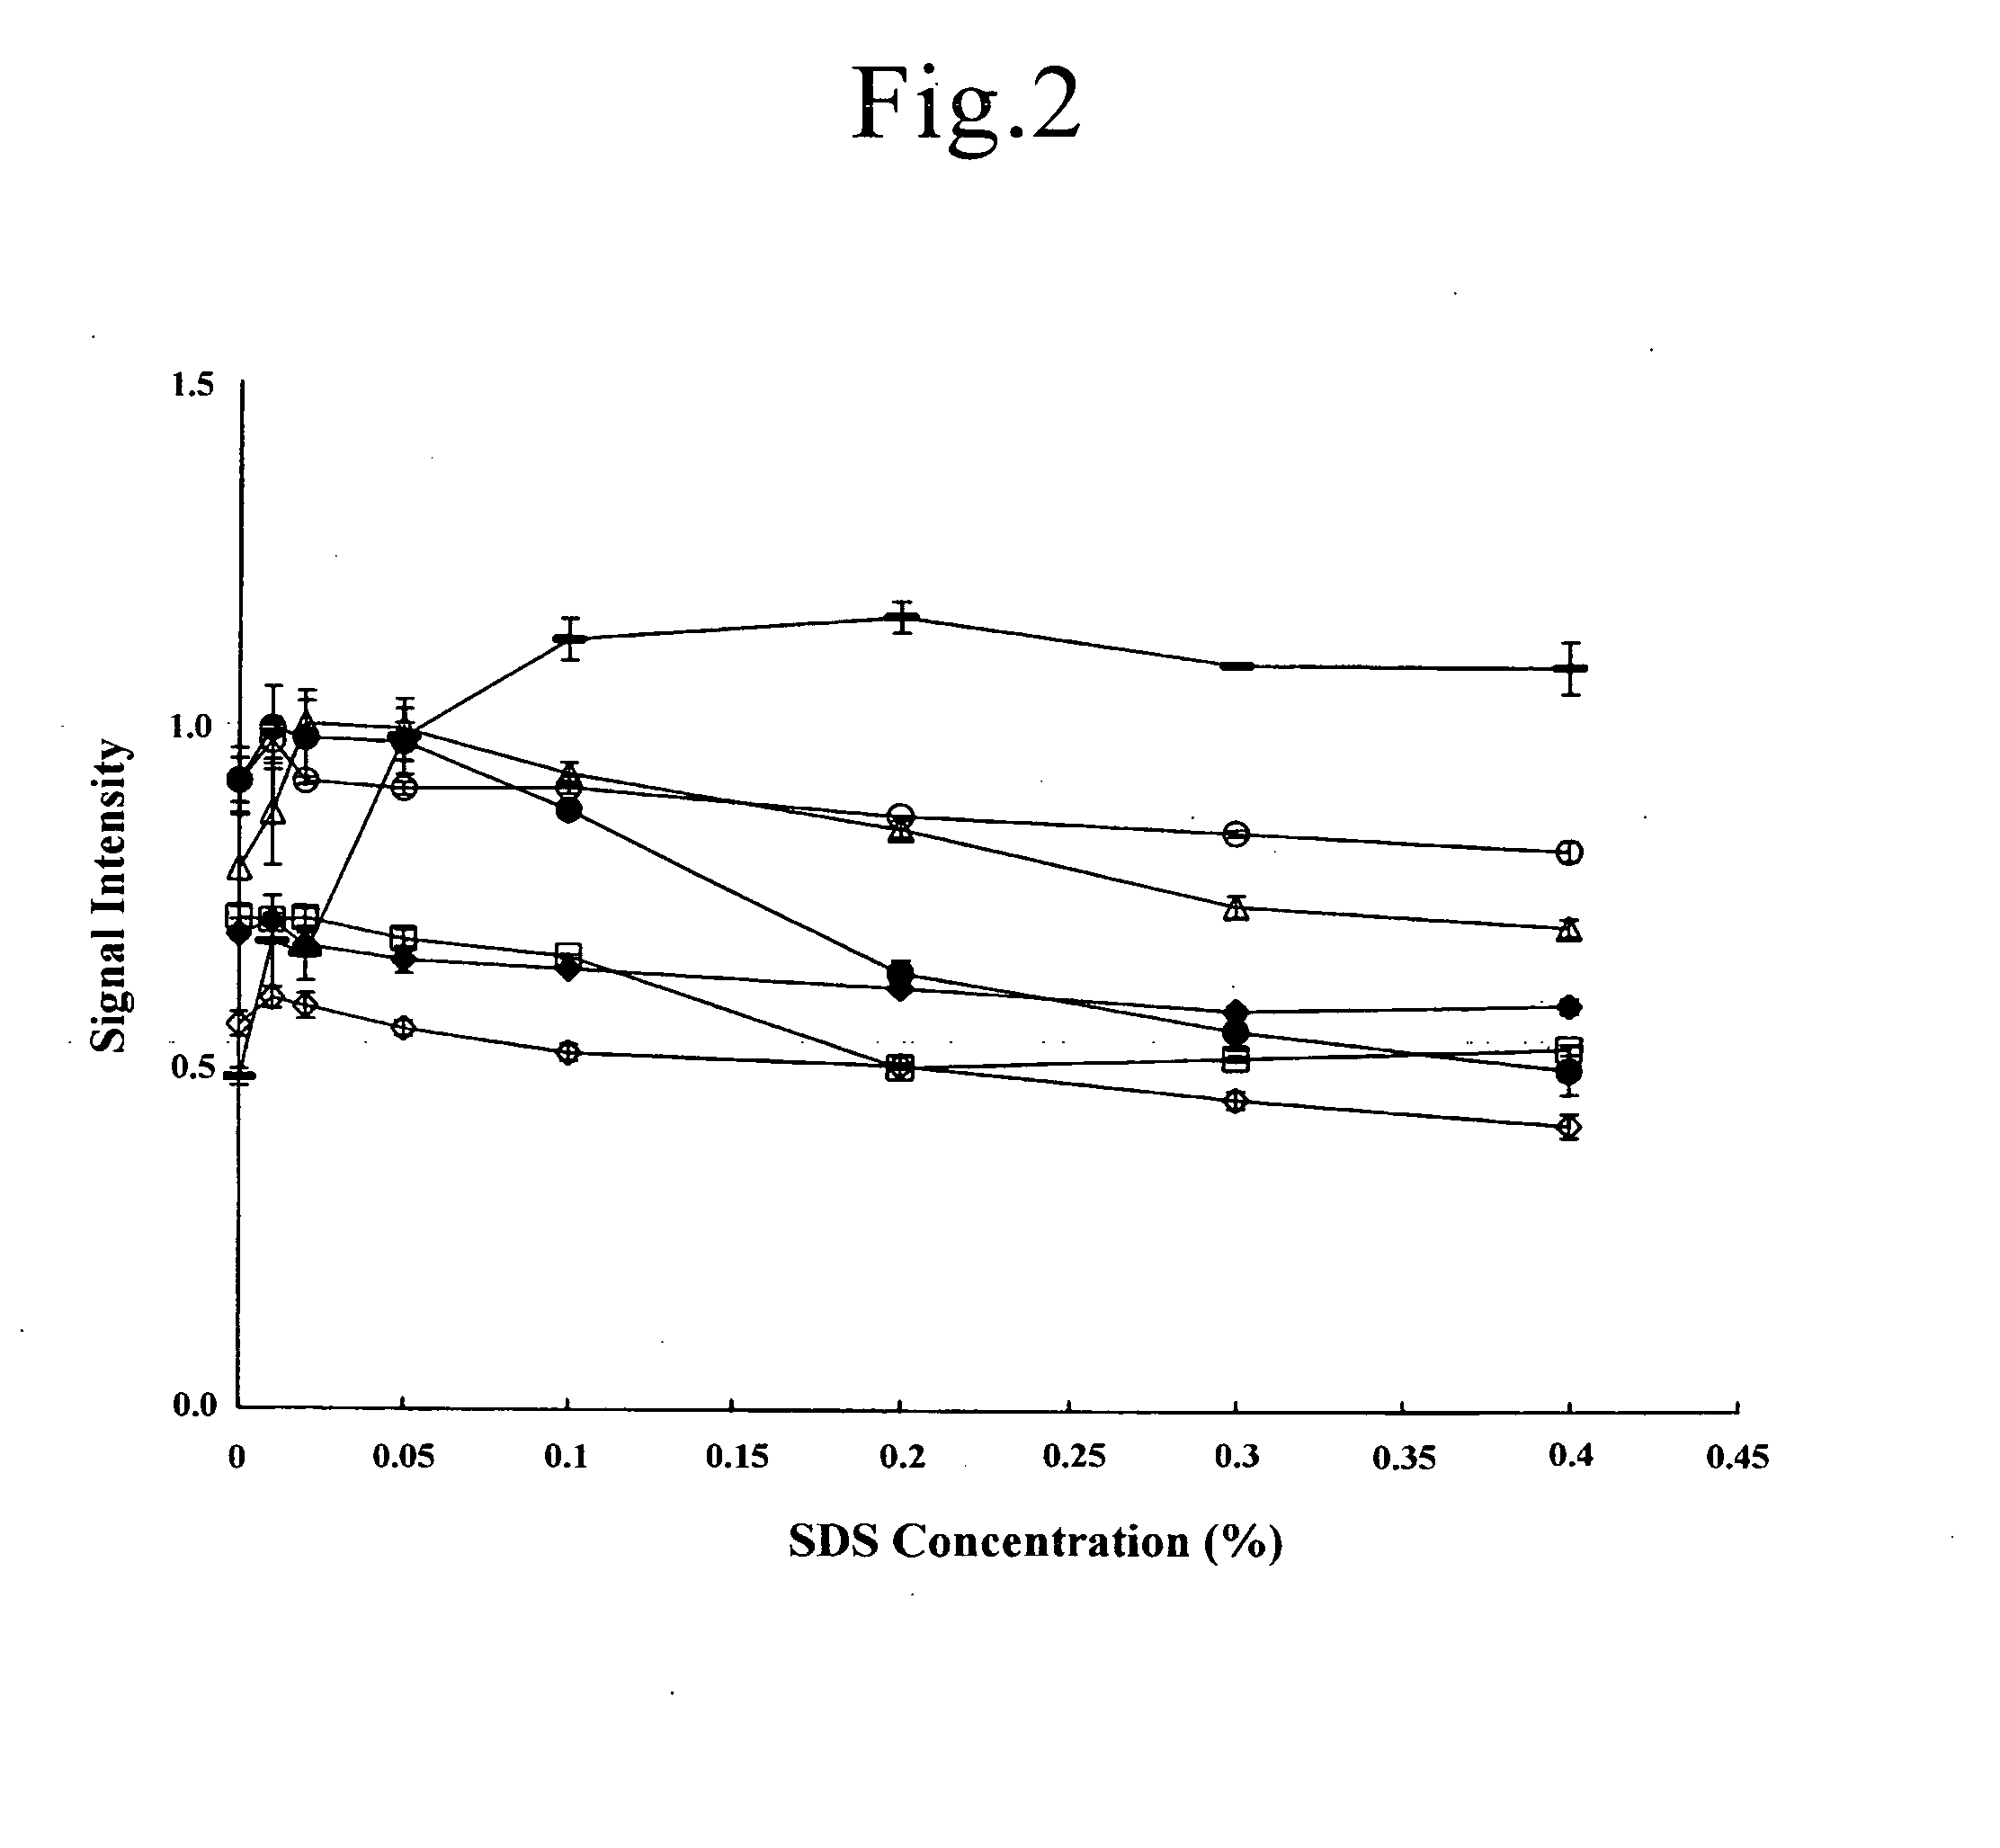 Protein Immobilization Method and Quantification Method